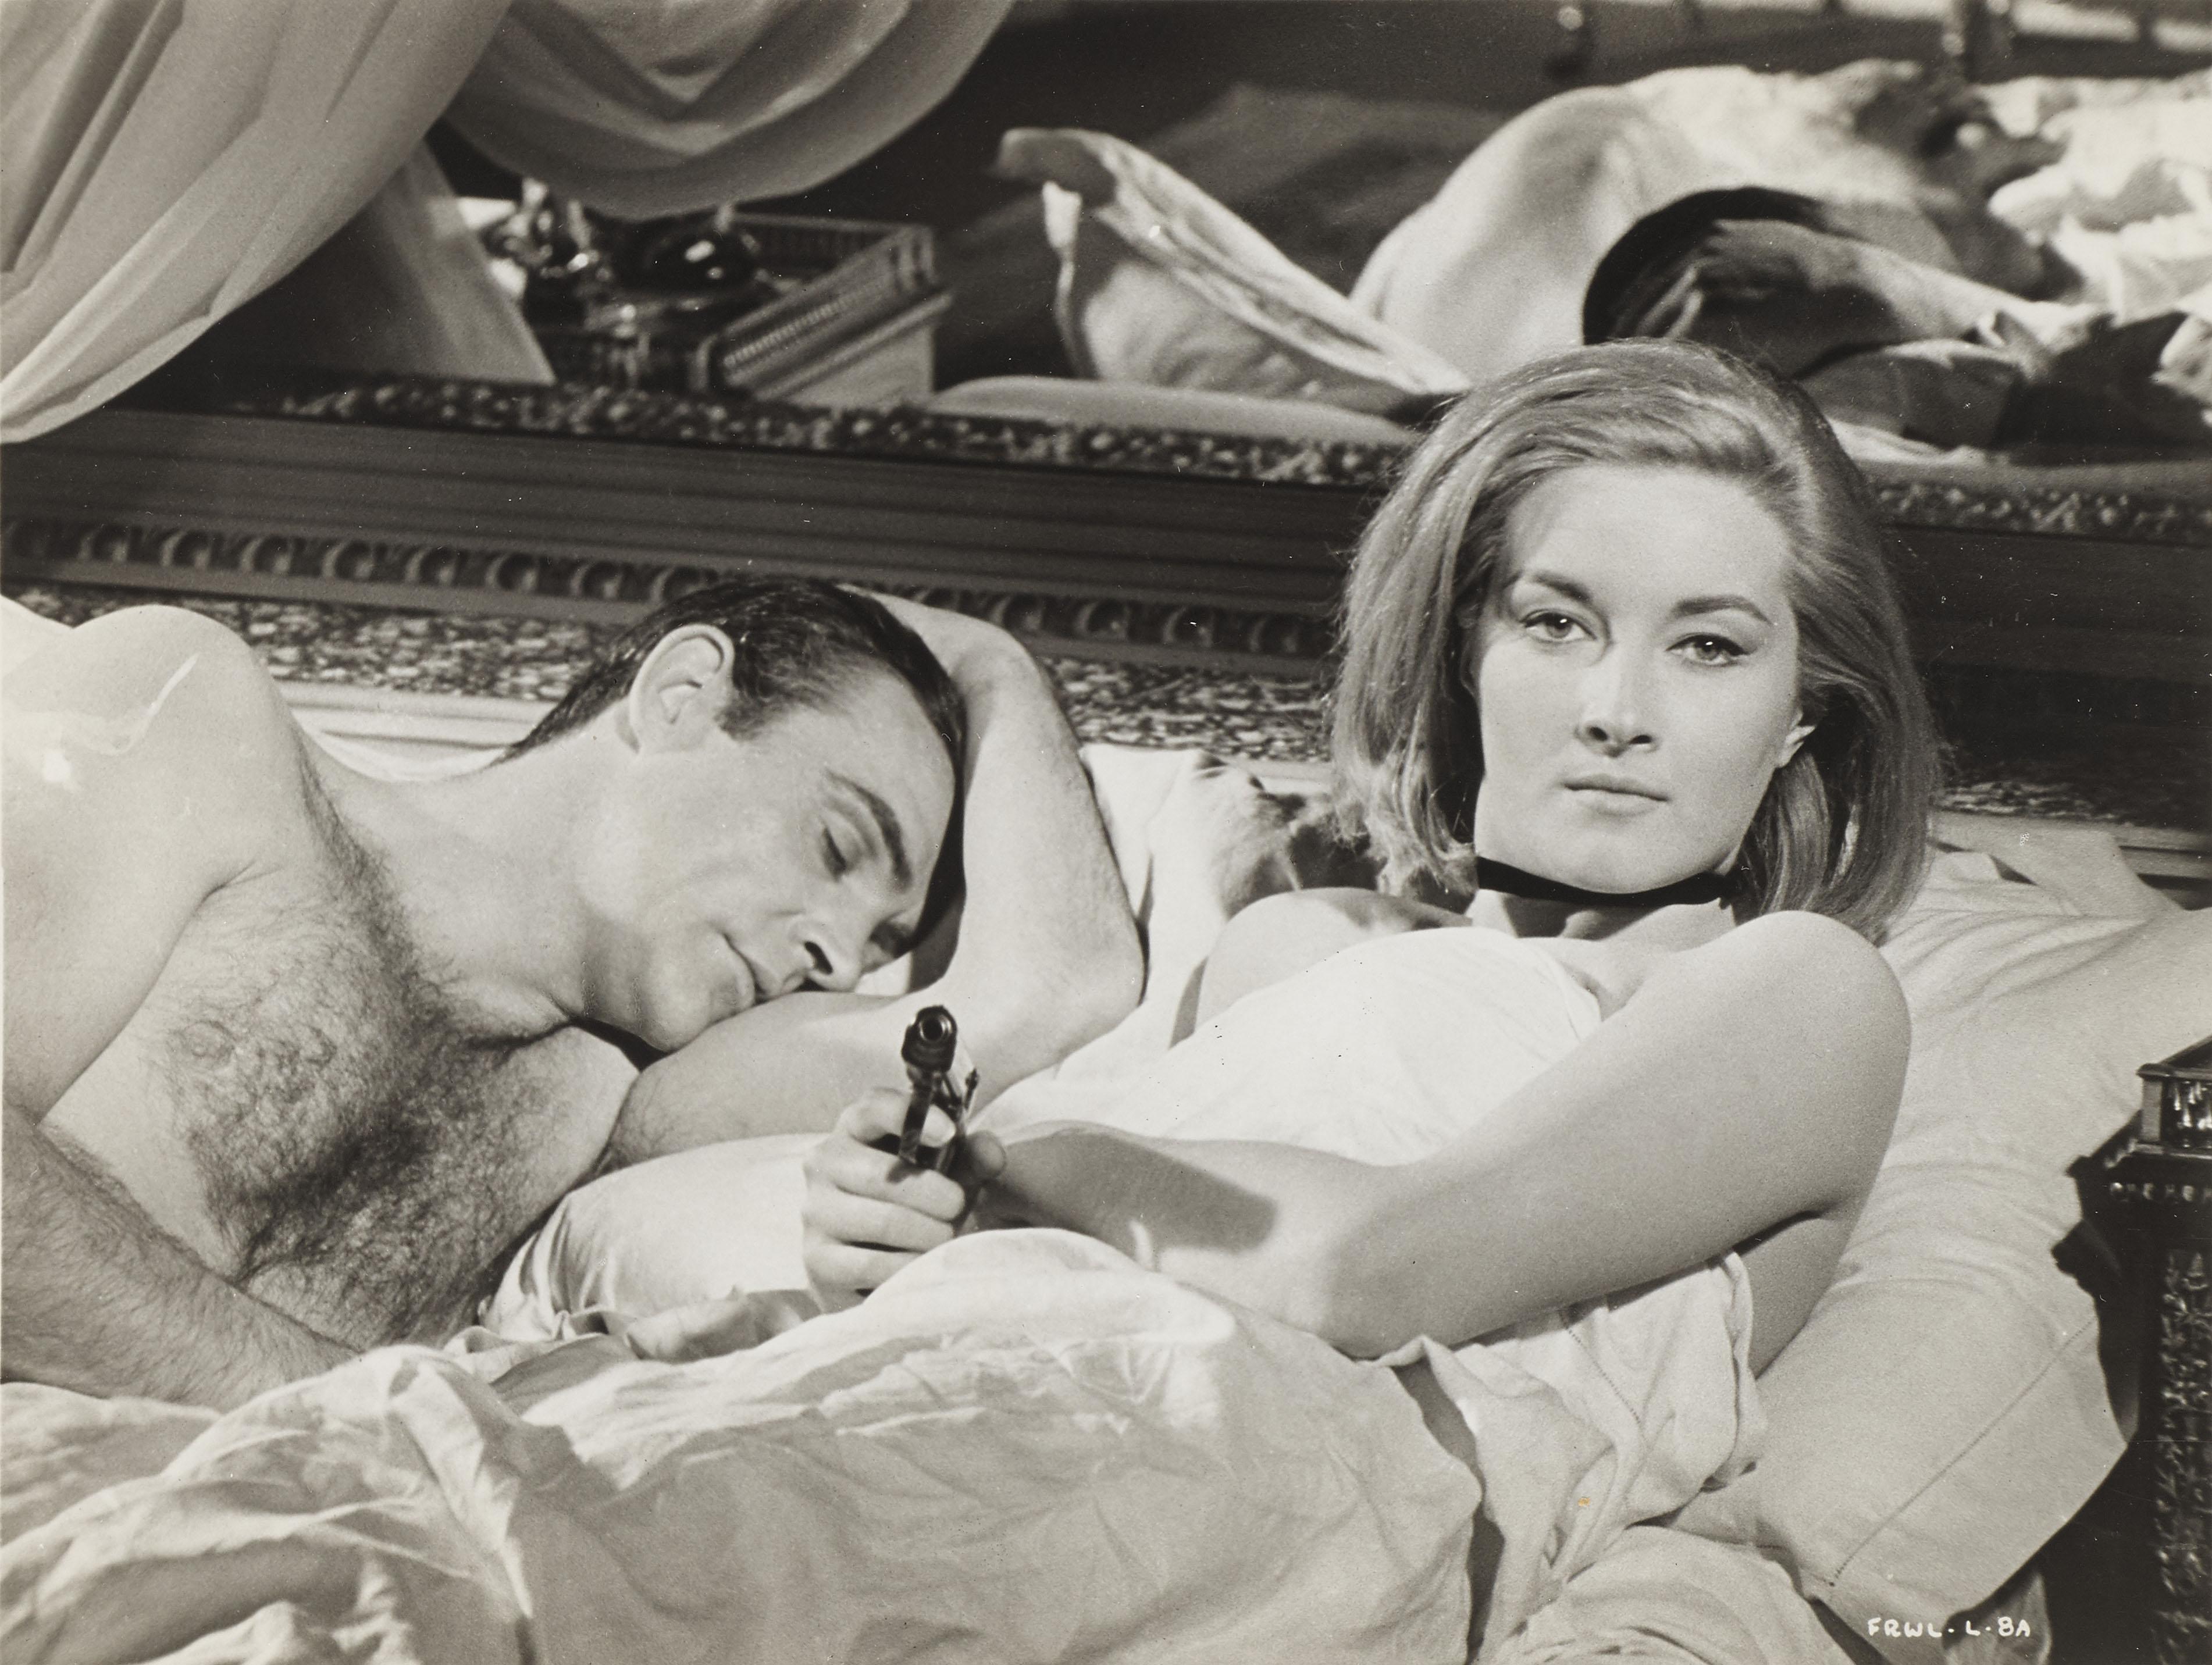 Original black and white photographic production still for Sean Connery's second outing as 007 in From Russia with Love 1963.
the legendary 1961 Audrey Hepburn Comedy, Romance. This film was directed by Terence Young, and starred  Sean Connery and